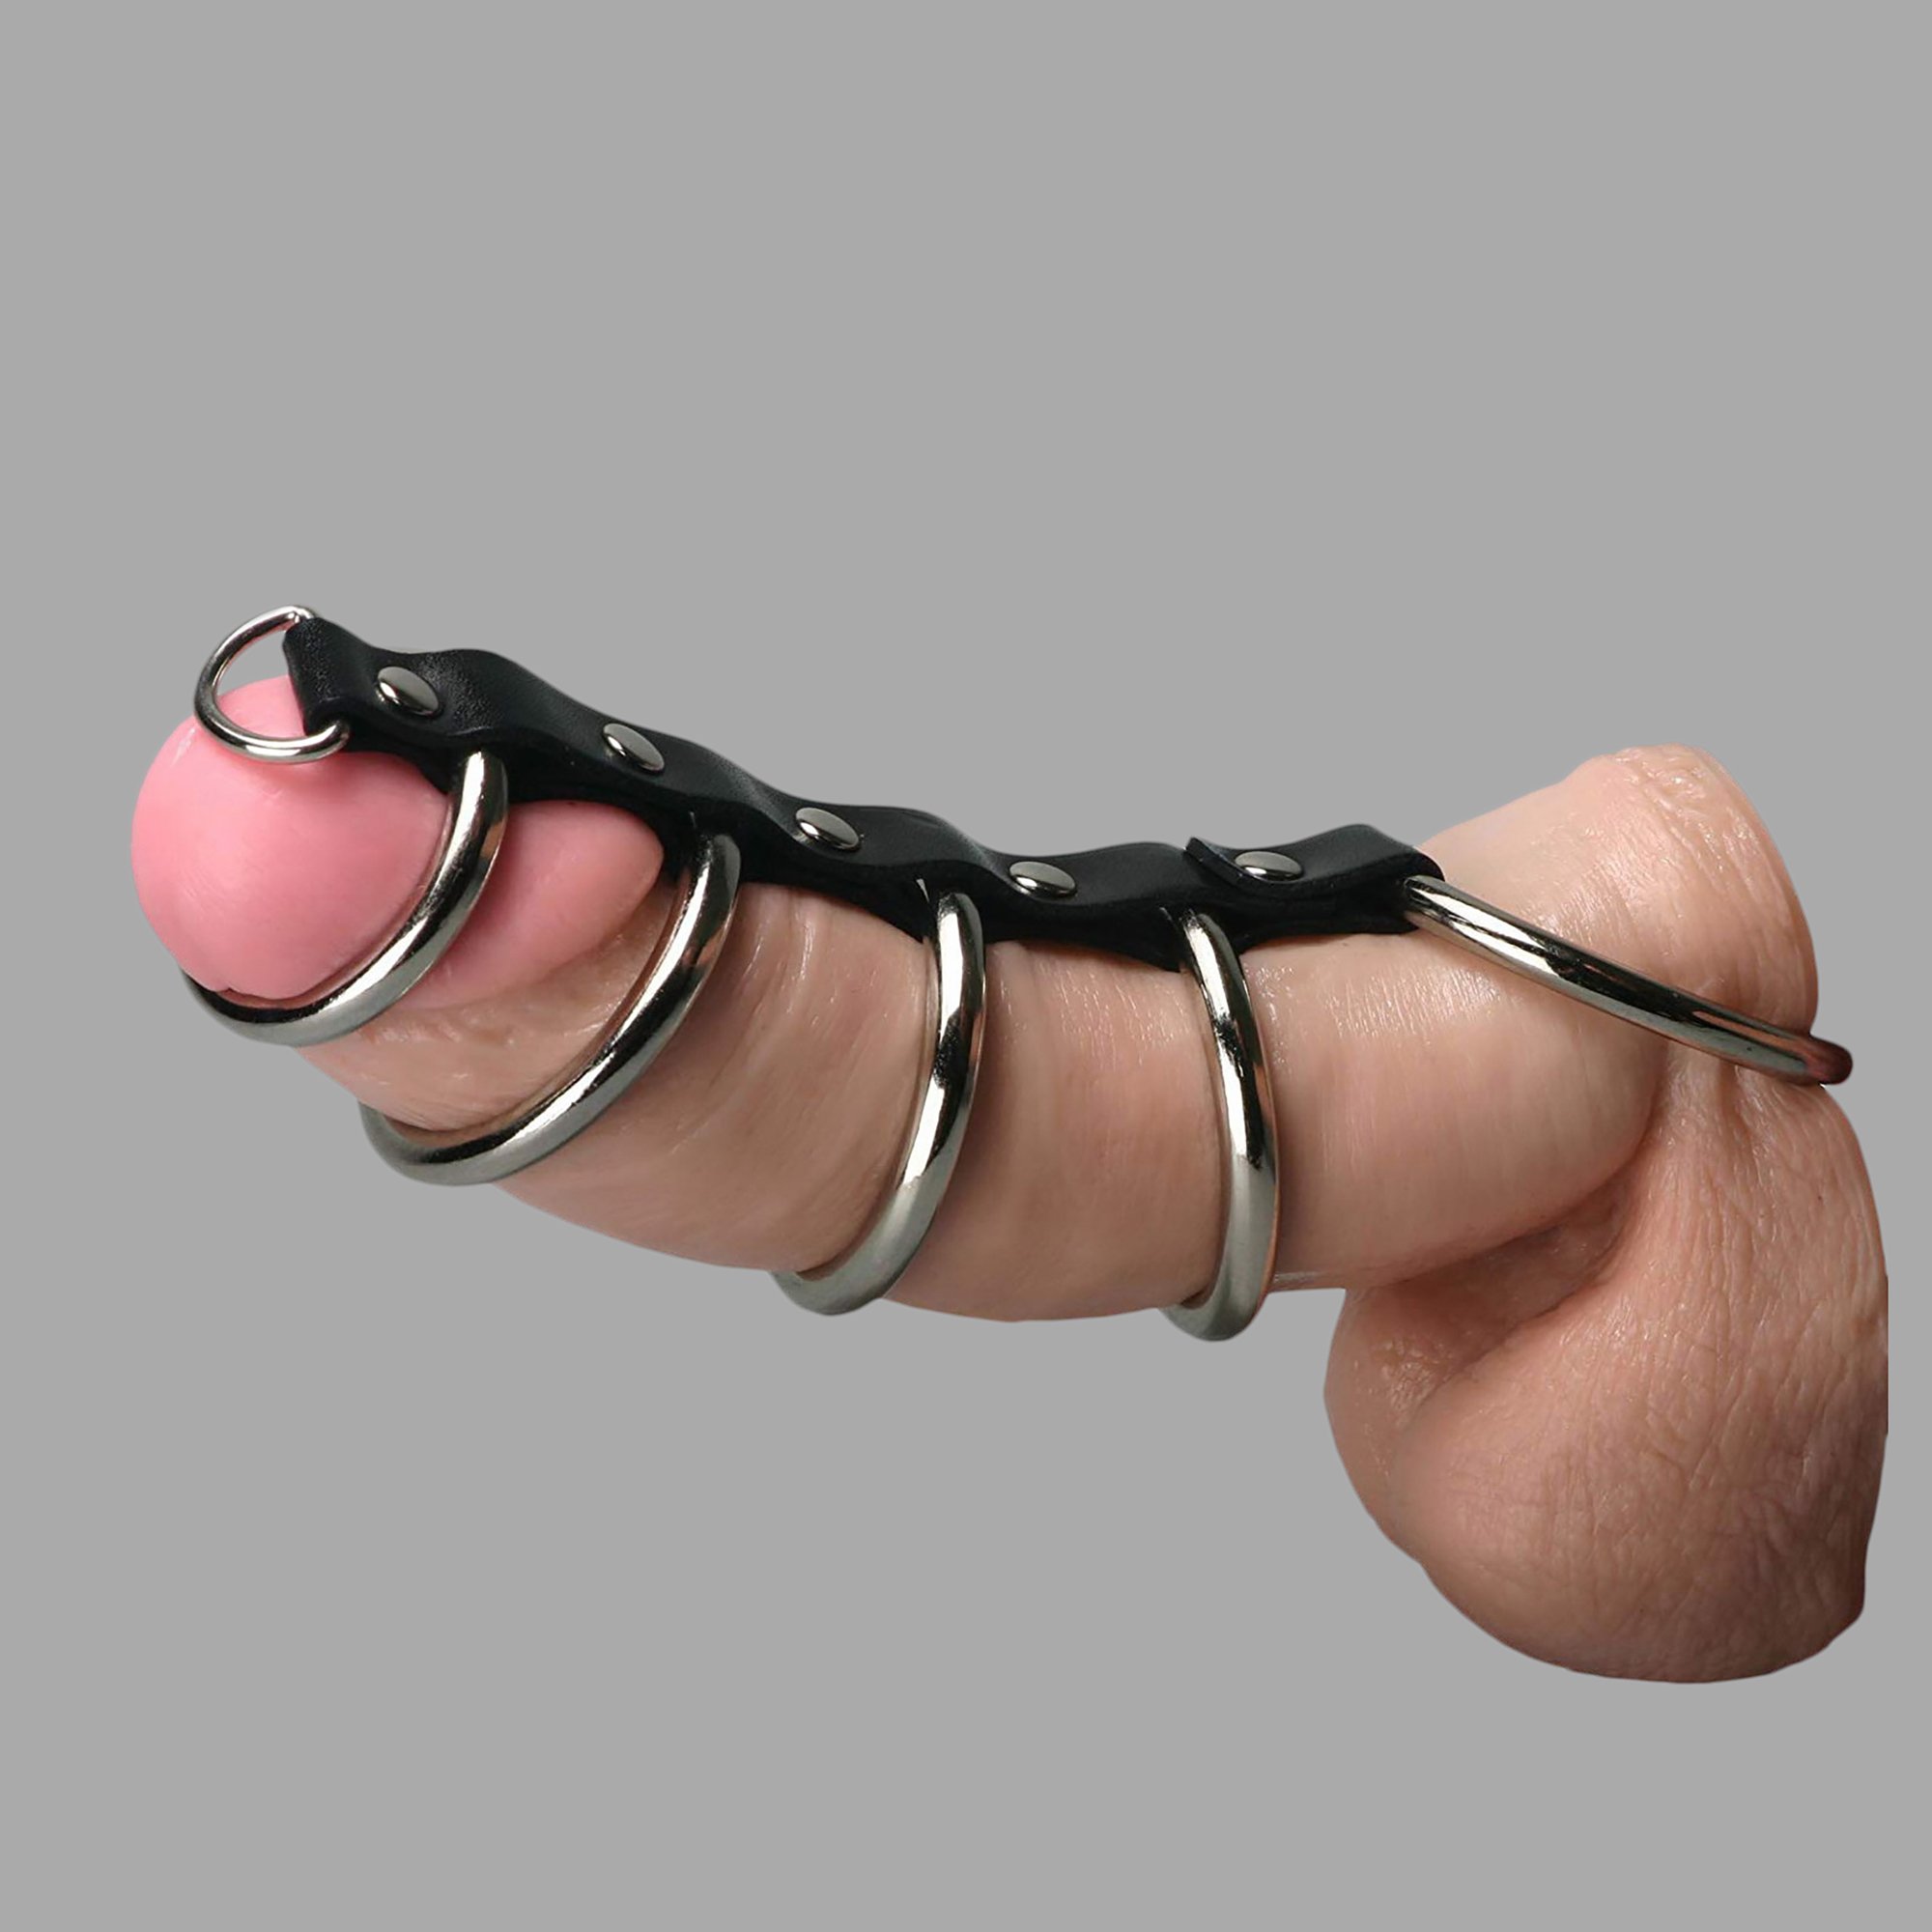 Buy Penis Cage - Gate of Hell - Cock Bondage from MEO | Cock & Ball...